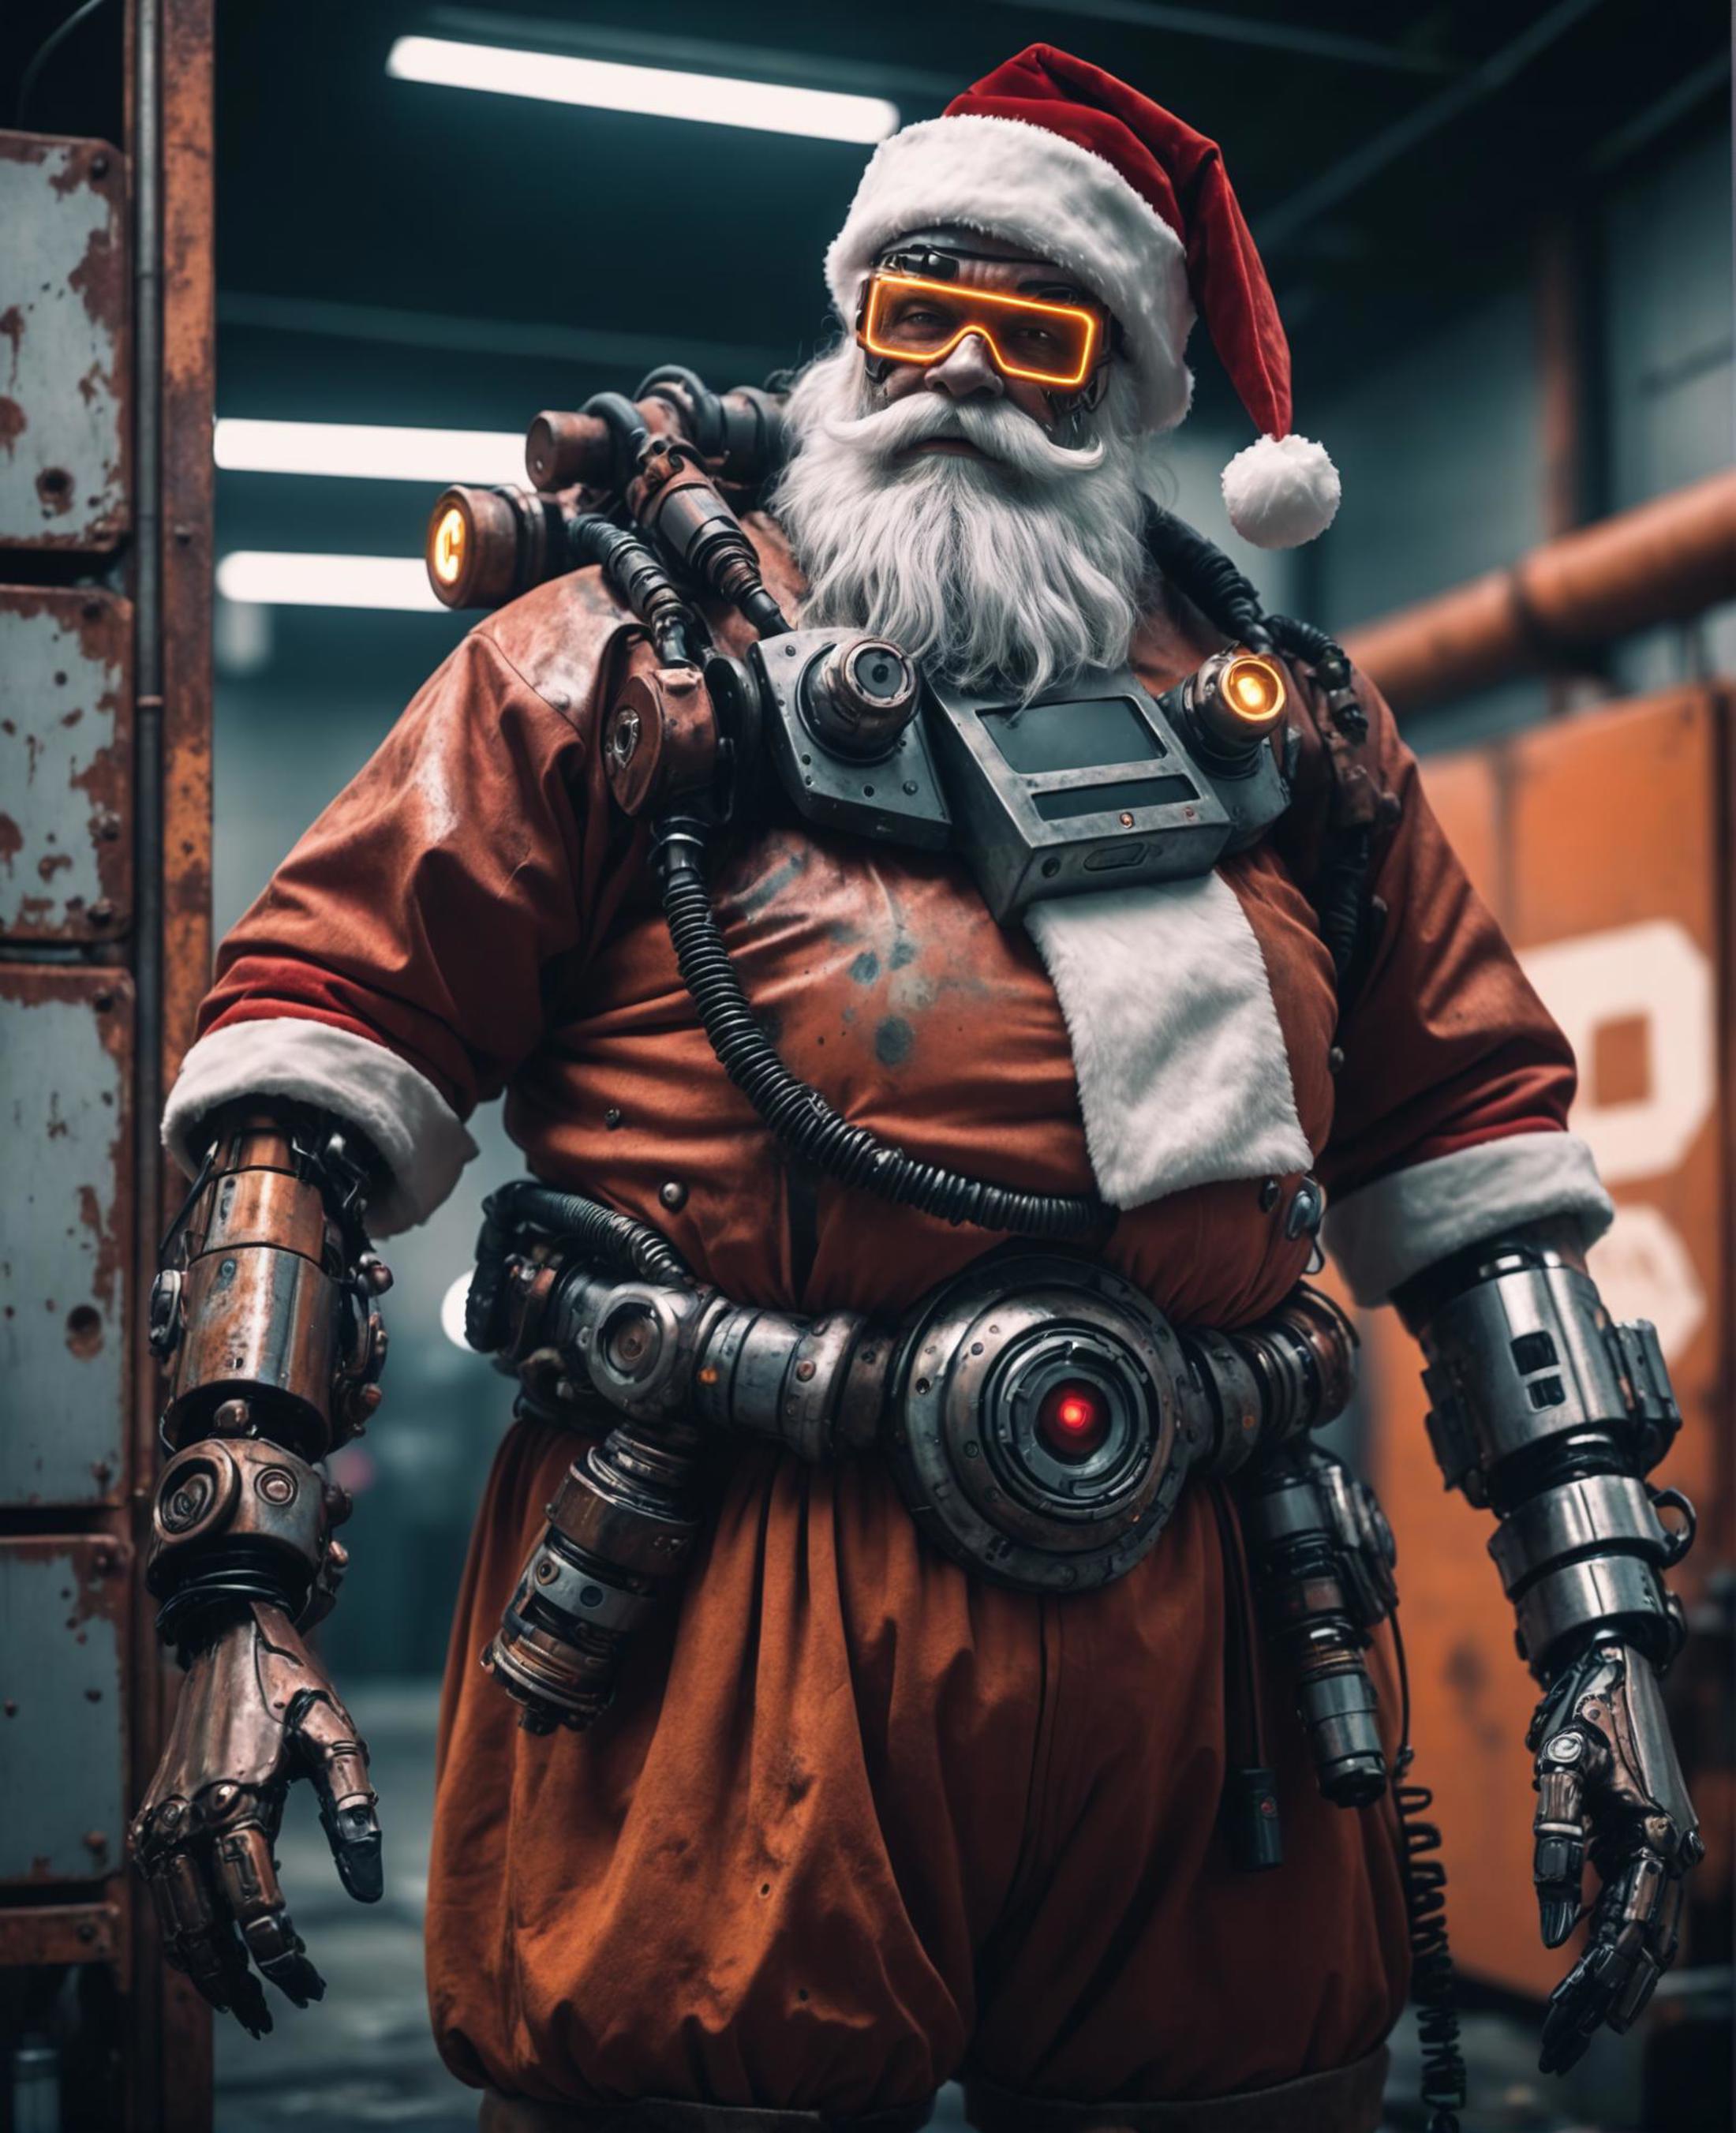 A robot dressed as Santa Claus wearing a Santa hat and goggles.